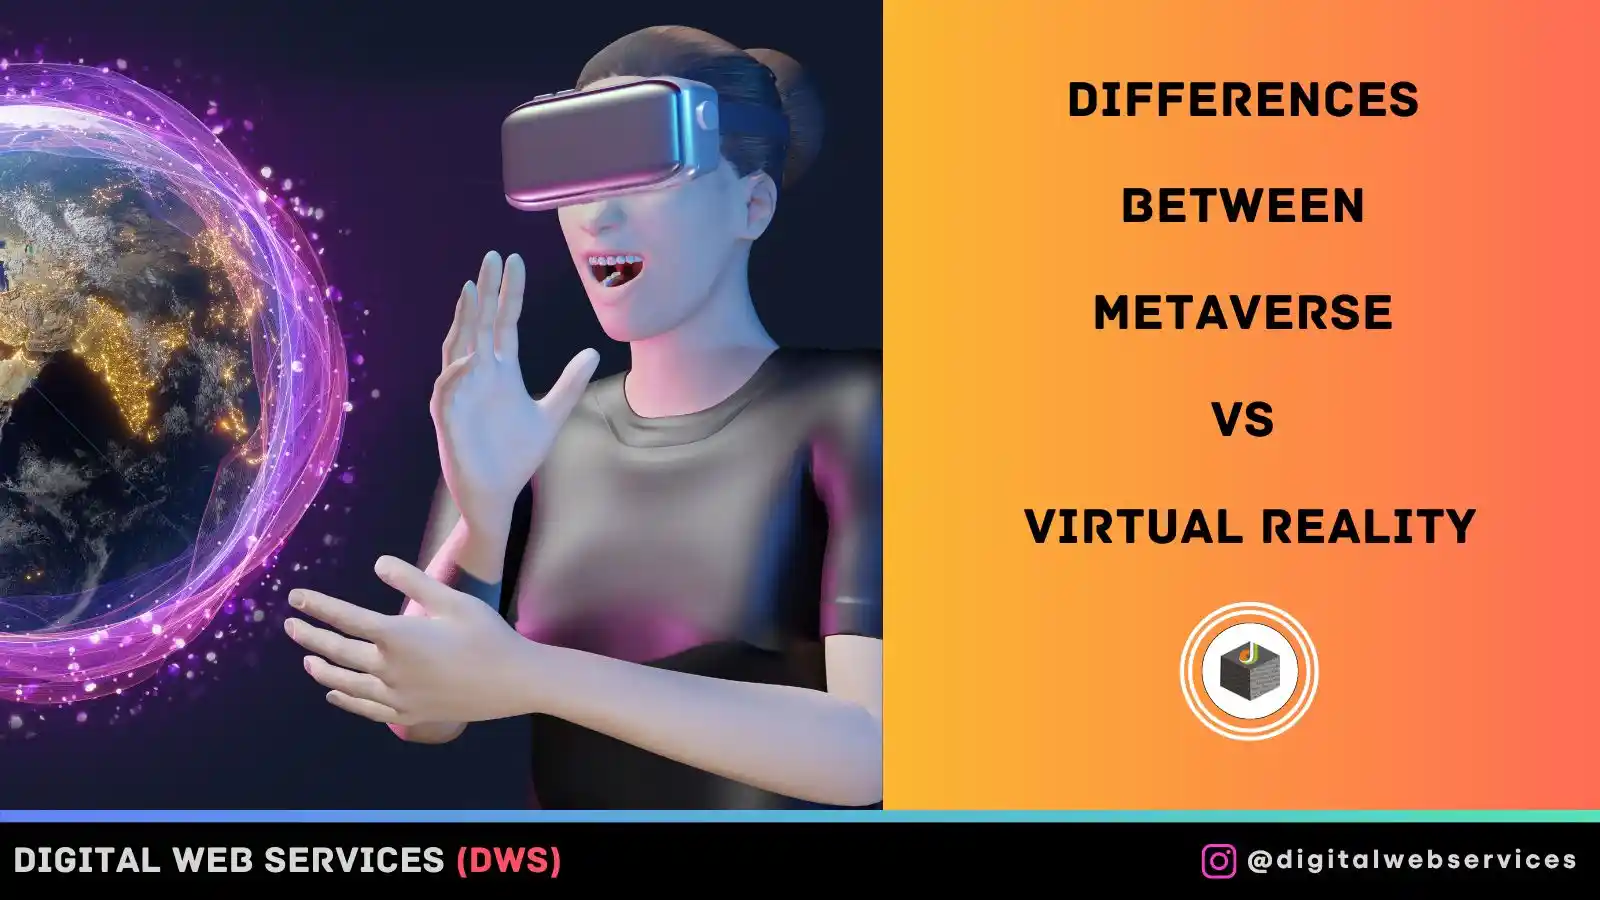 Differences Between Metaverse vs Virtual Reality